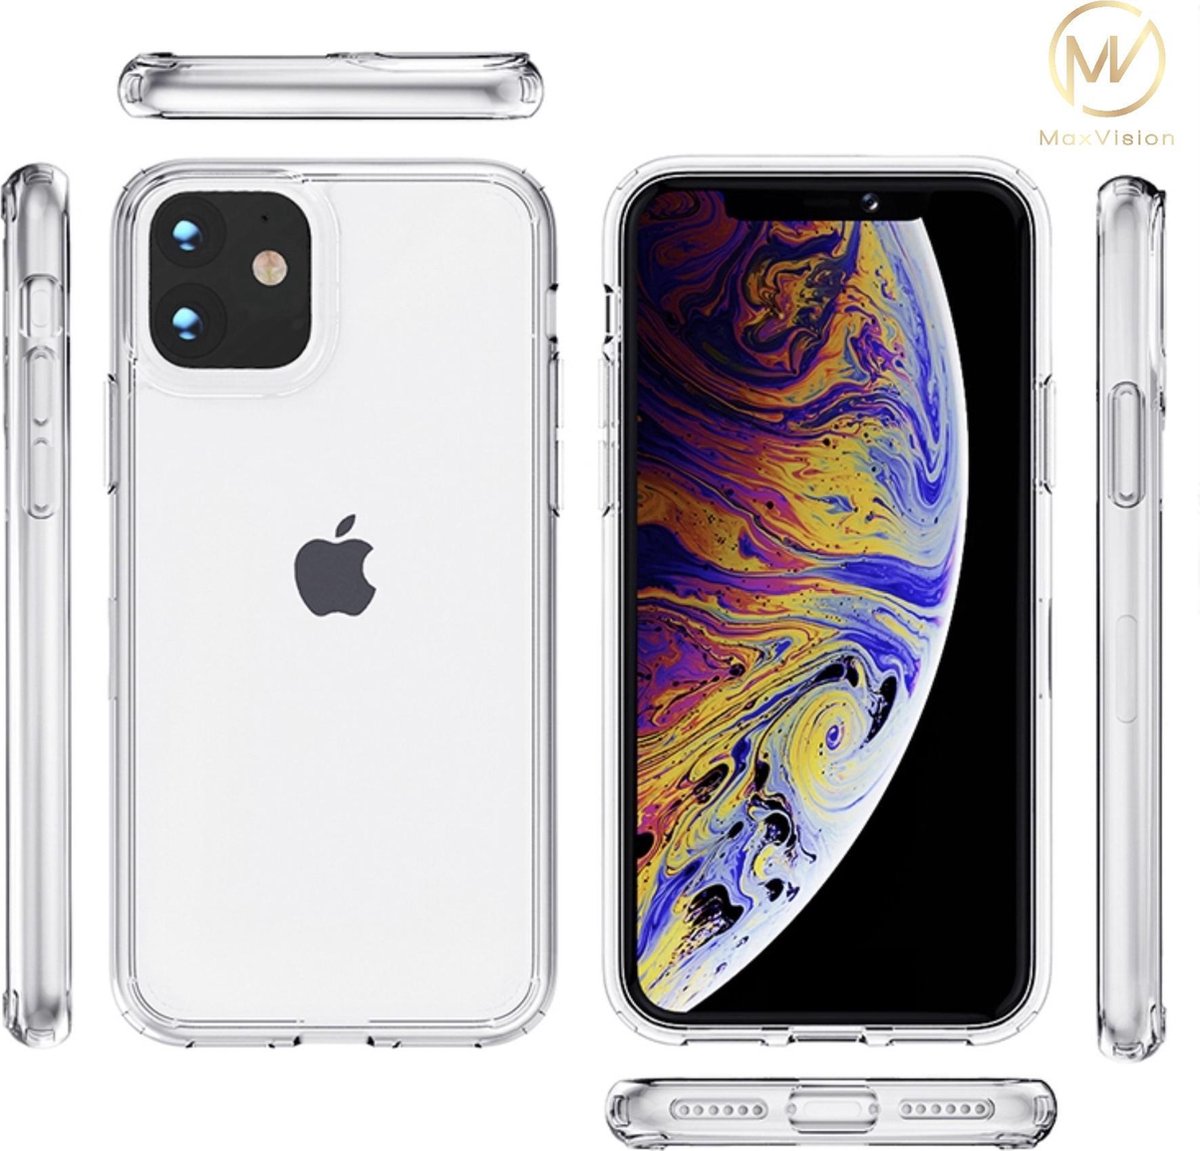 MaxVision's iPhone 11 Transparant Hoesje + Screenprotector: Transparant Siliconen Hoesje / Case / Cover + Tempered Glass Screenprotector